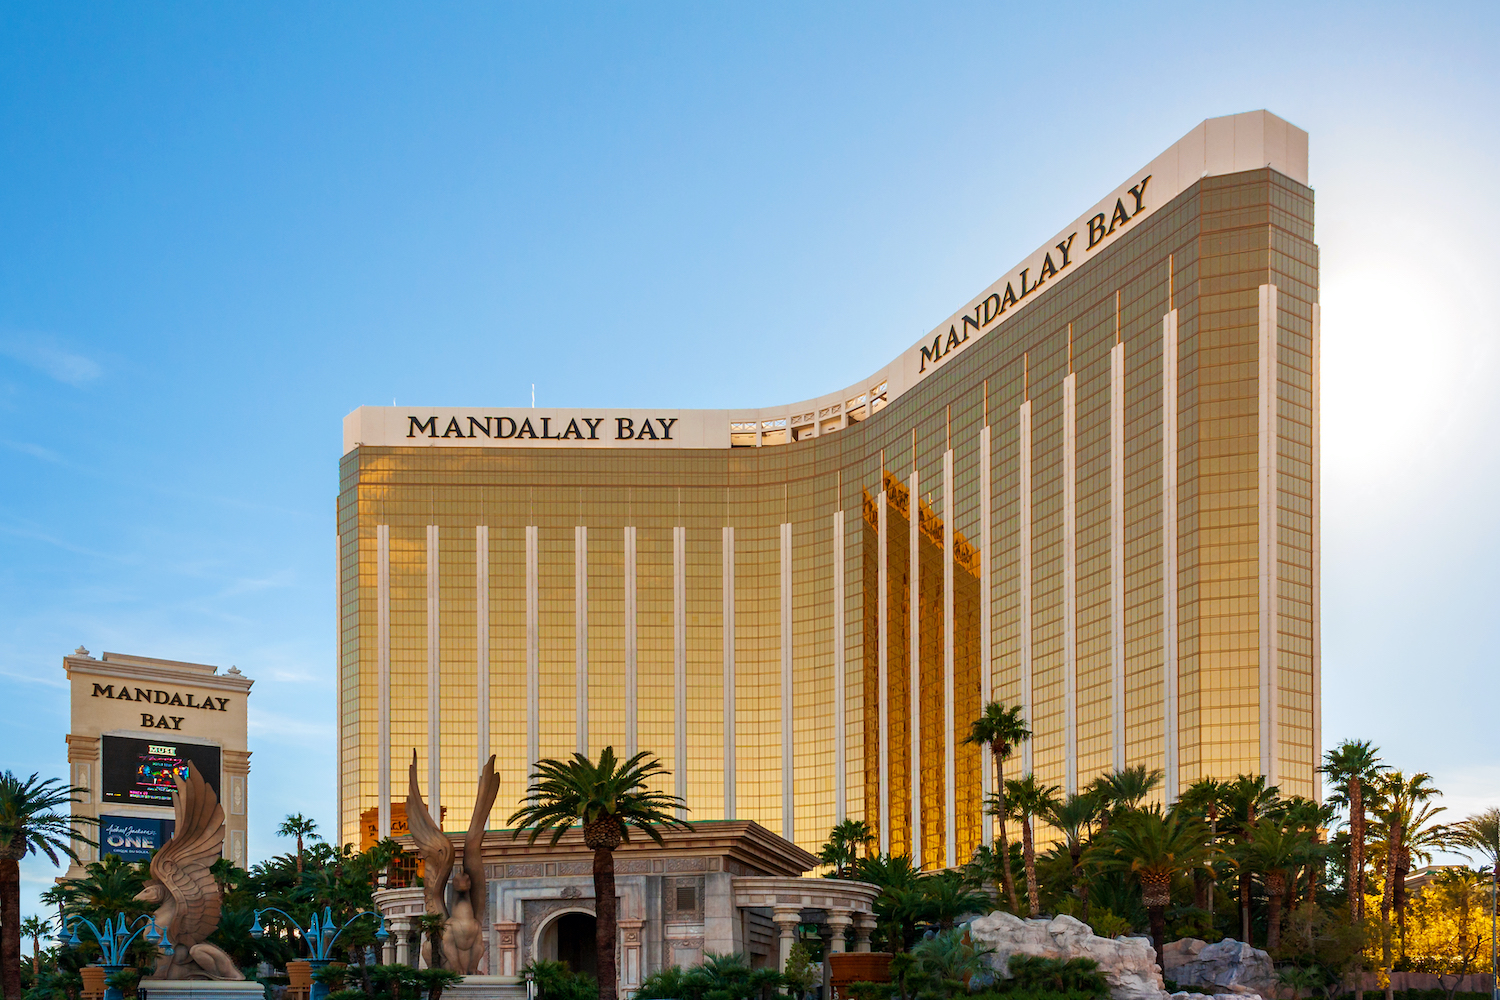 Blackstone Reit And Mgm Jv To Buy Mgm Grand And Mandalay Bay For 4 6 Billion The Di Wire